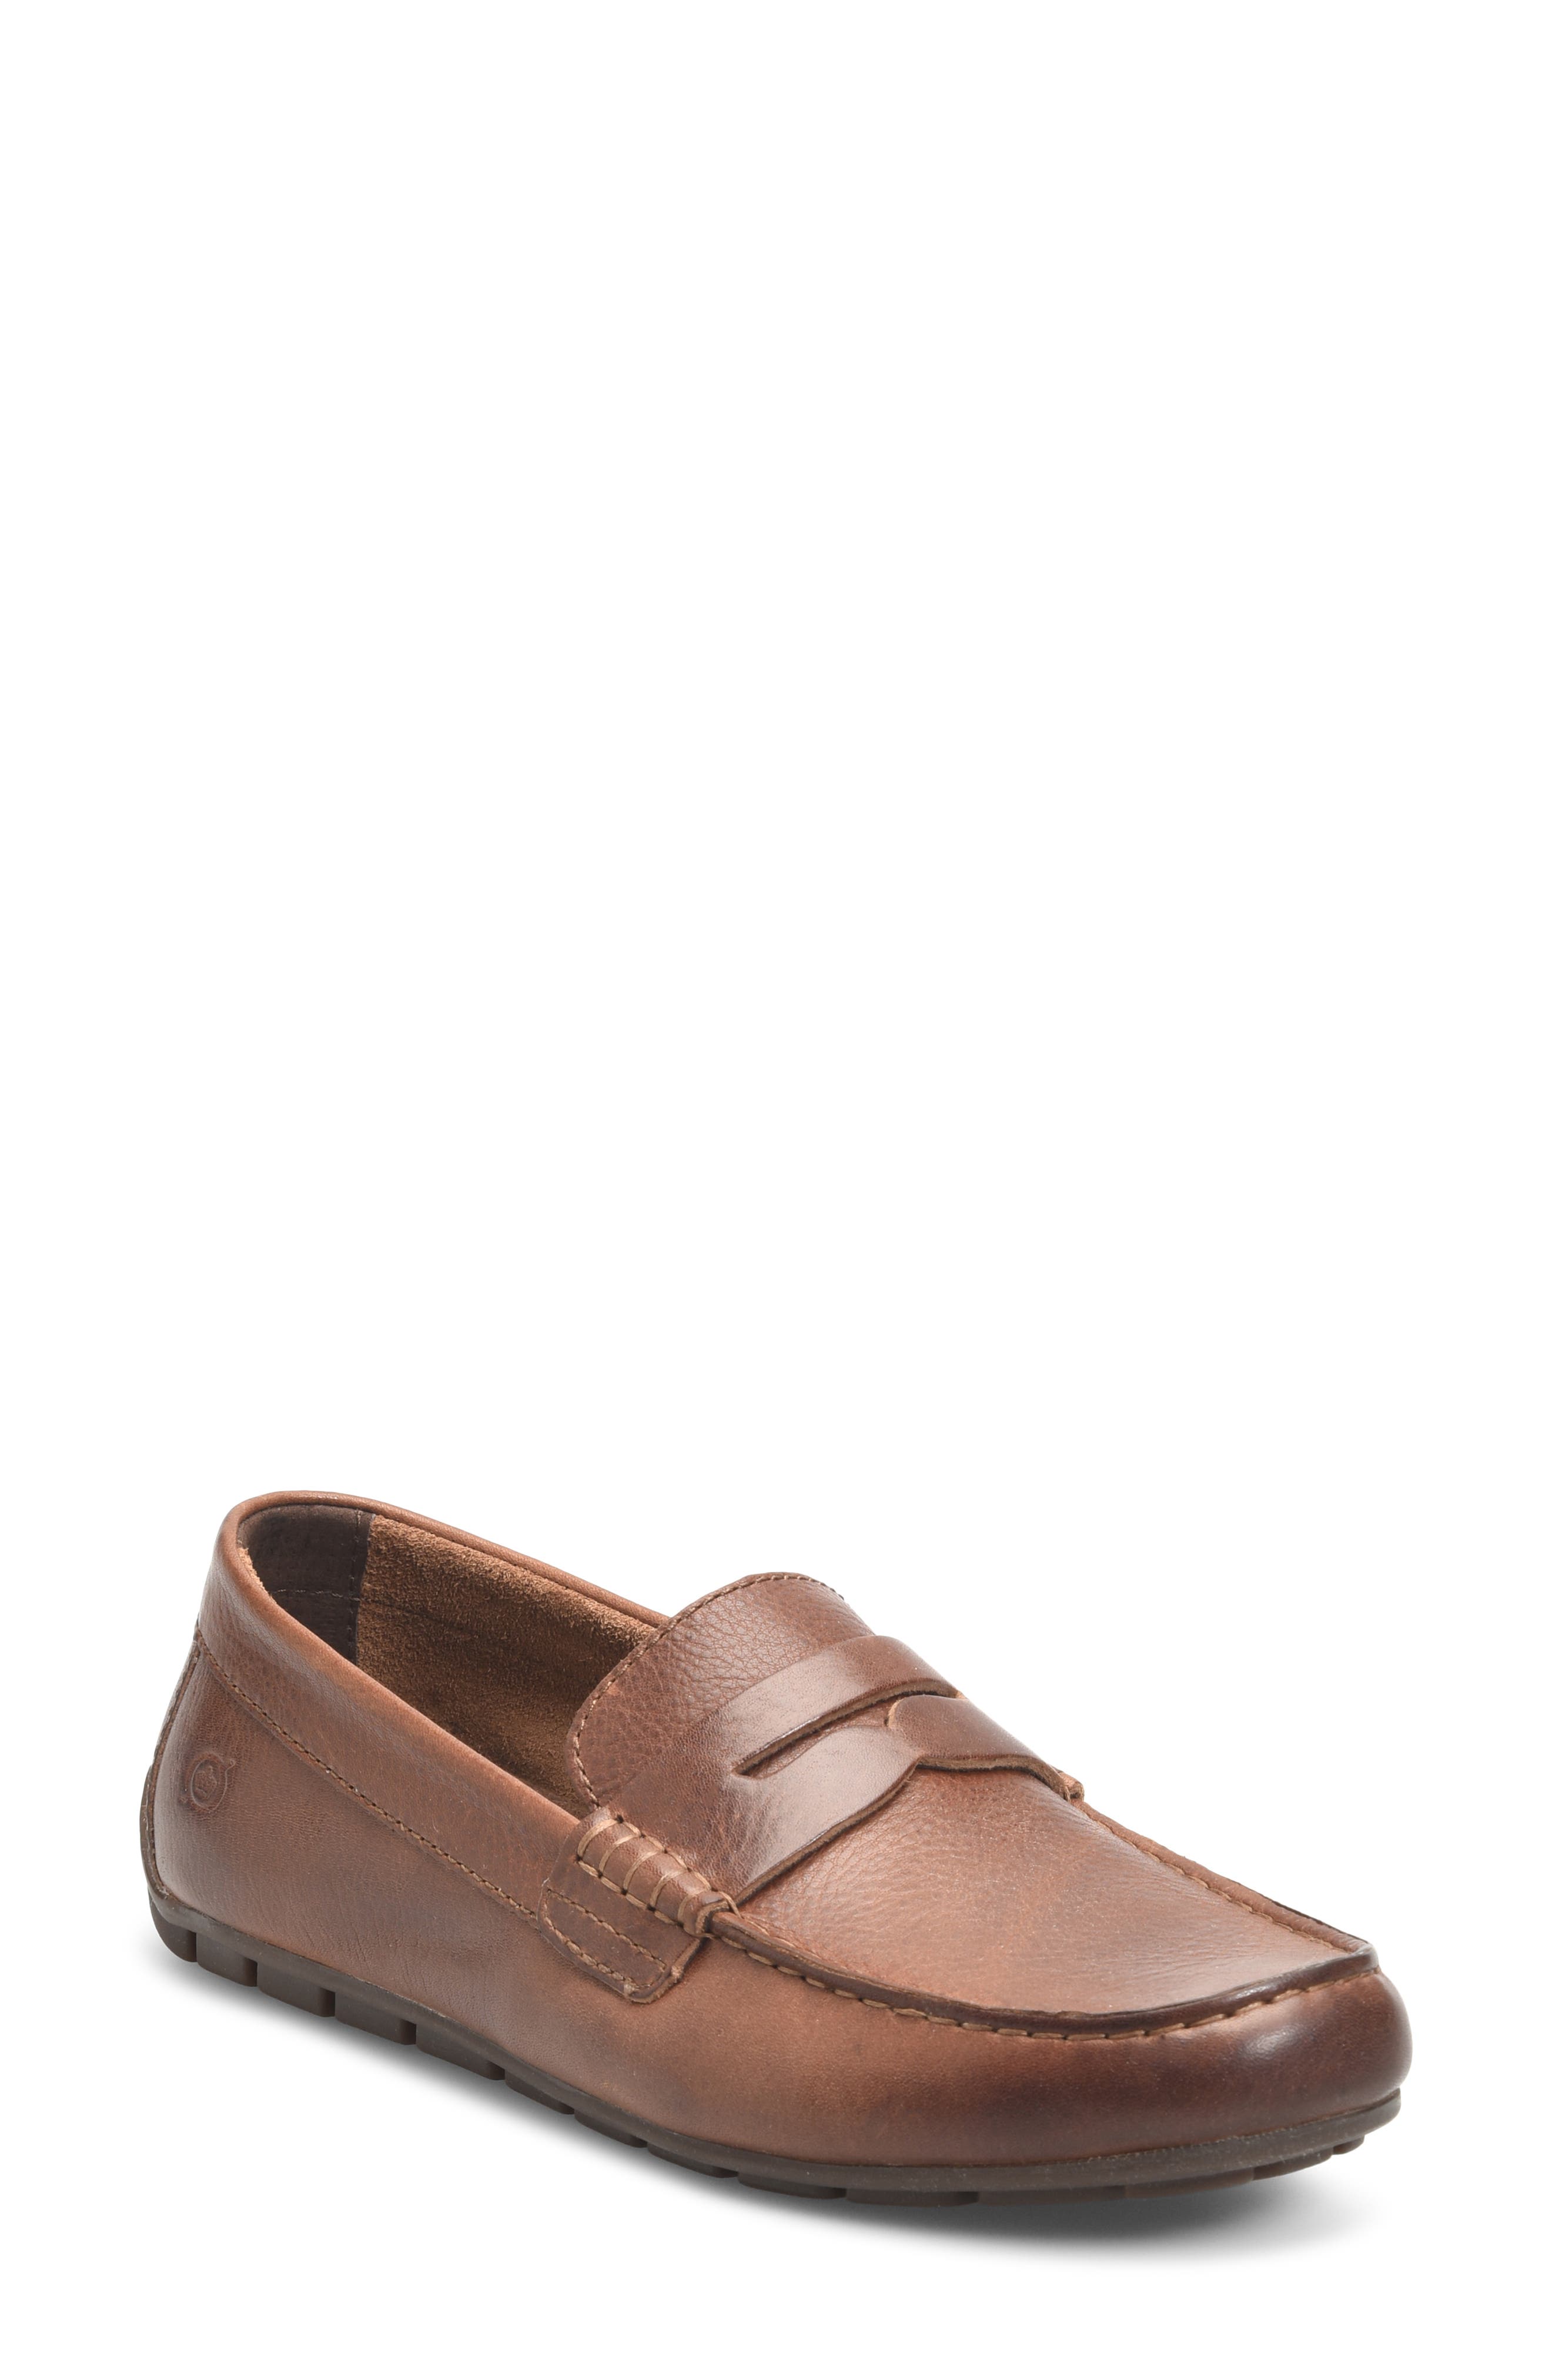 slip on loafers canada